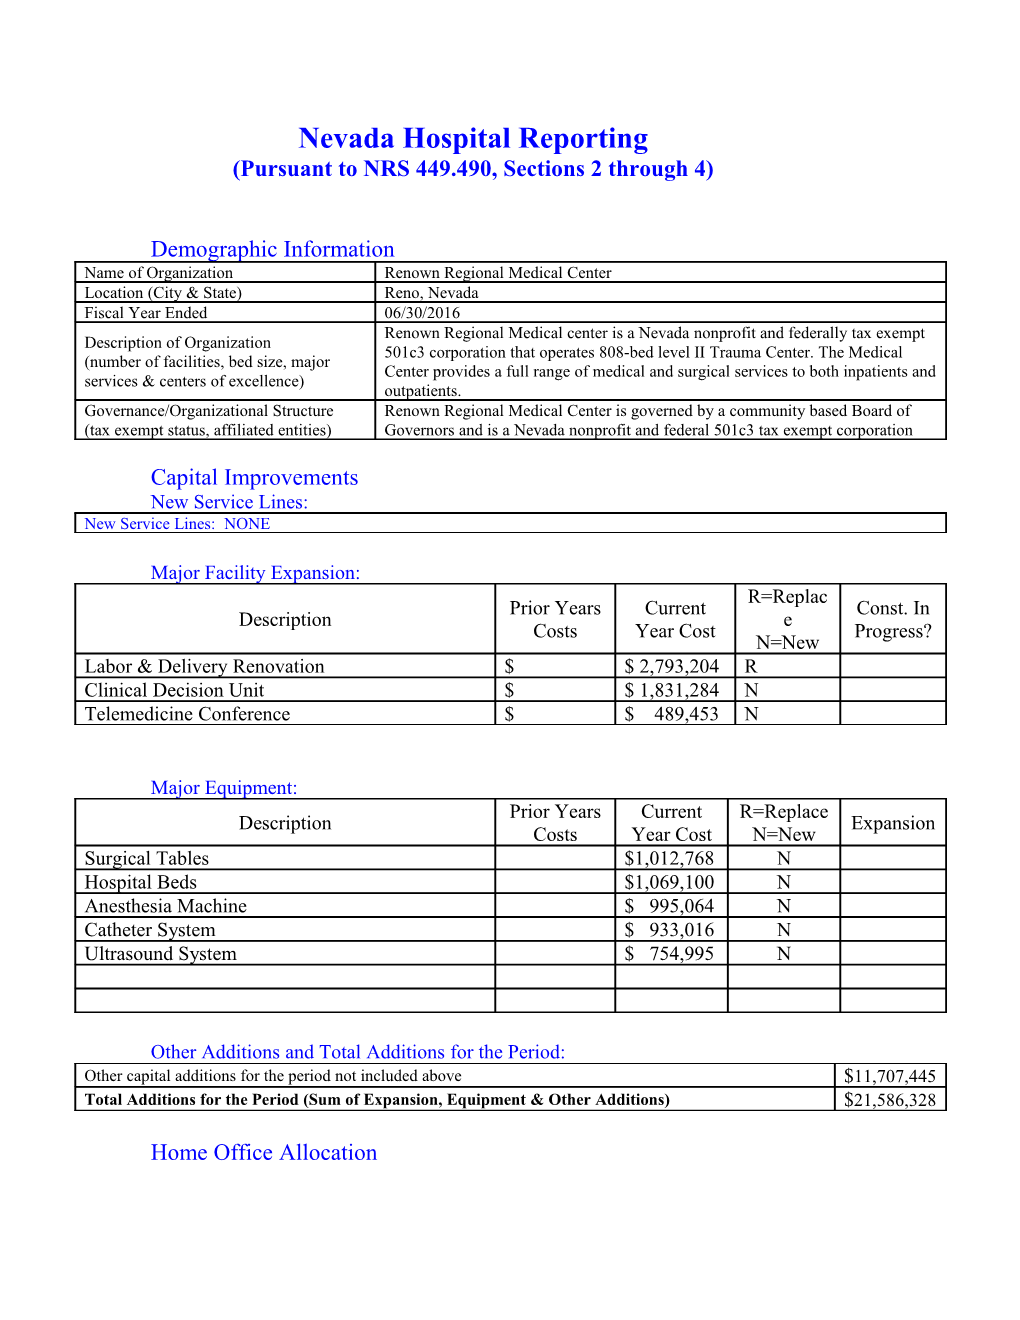 Nevada Community Benefit Reporting Template s3